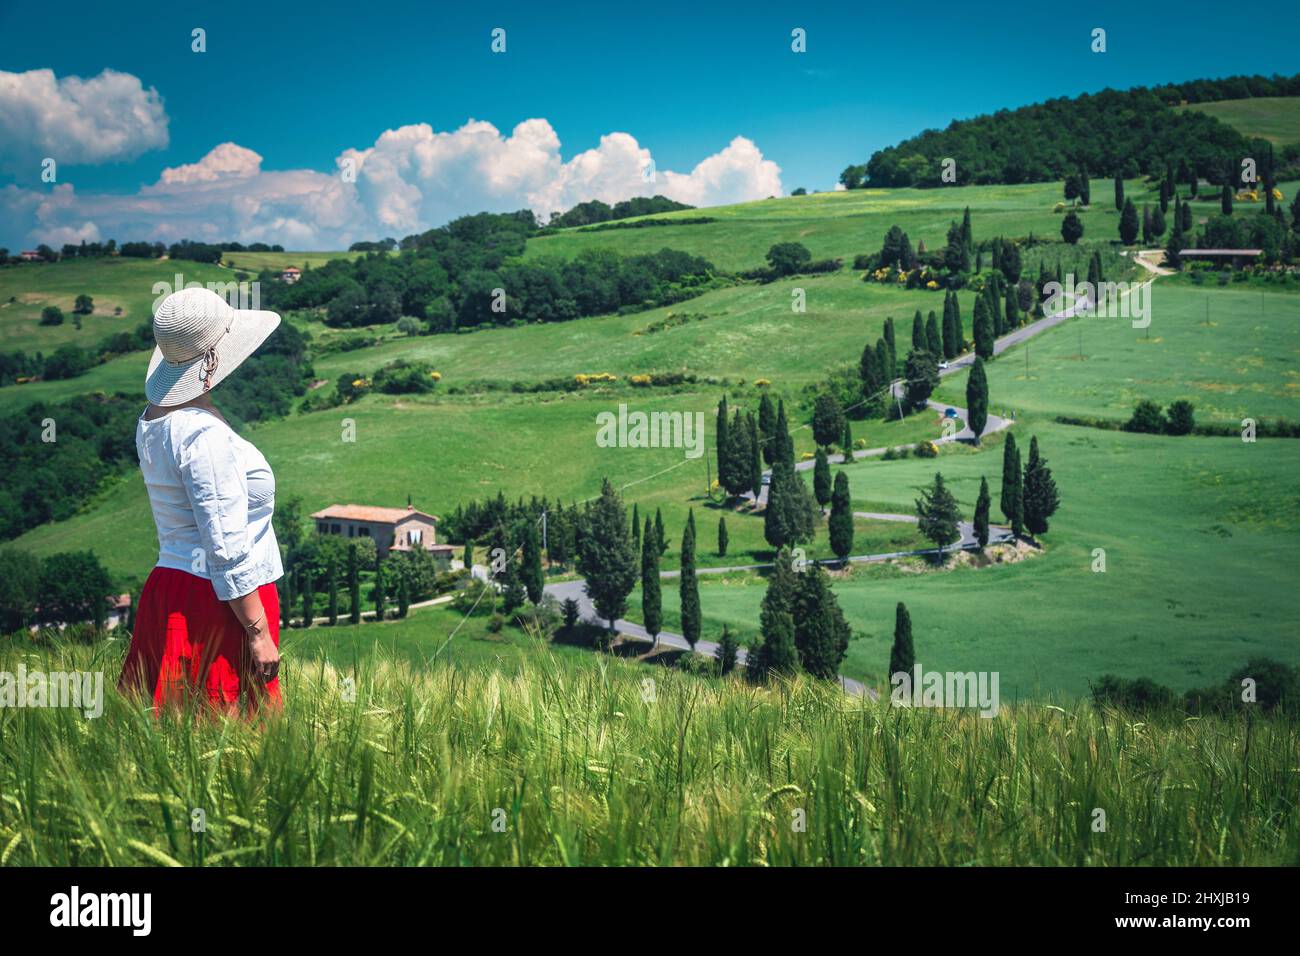 Pretty cheerful woman in a red skirt white shirt and a straw hat enjoying the view in Tuscany. Famous rural touristic place with grain fields and curv Stock Photo